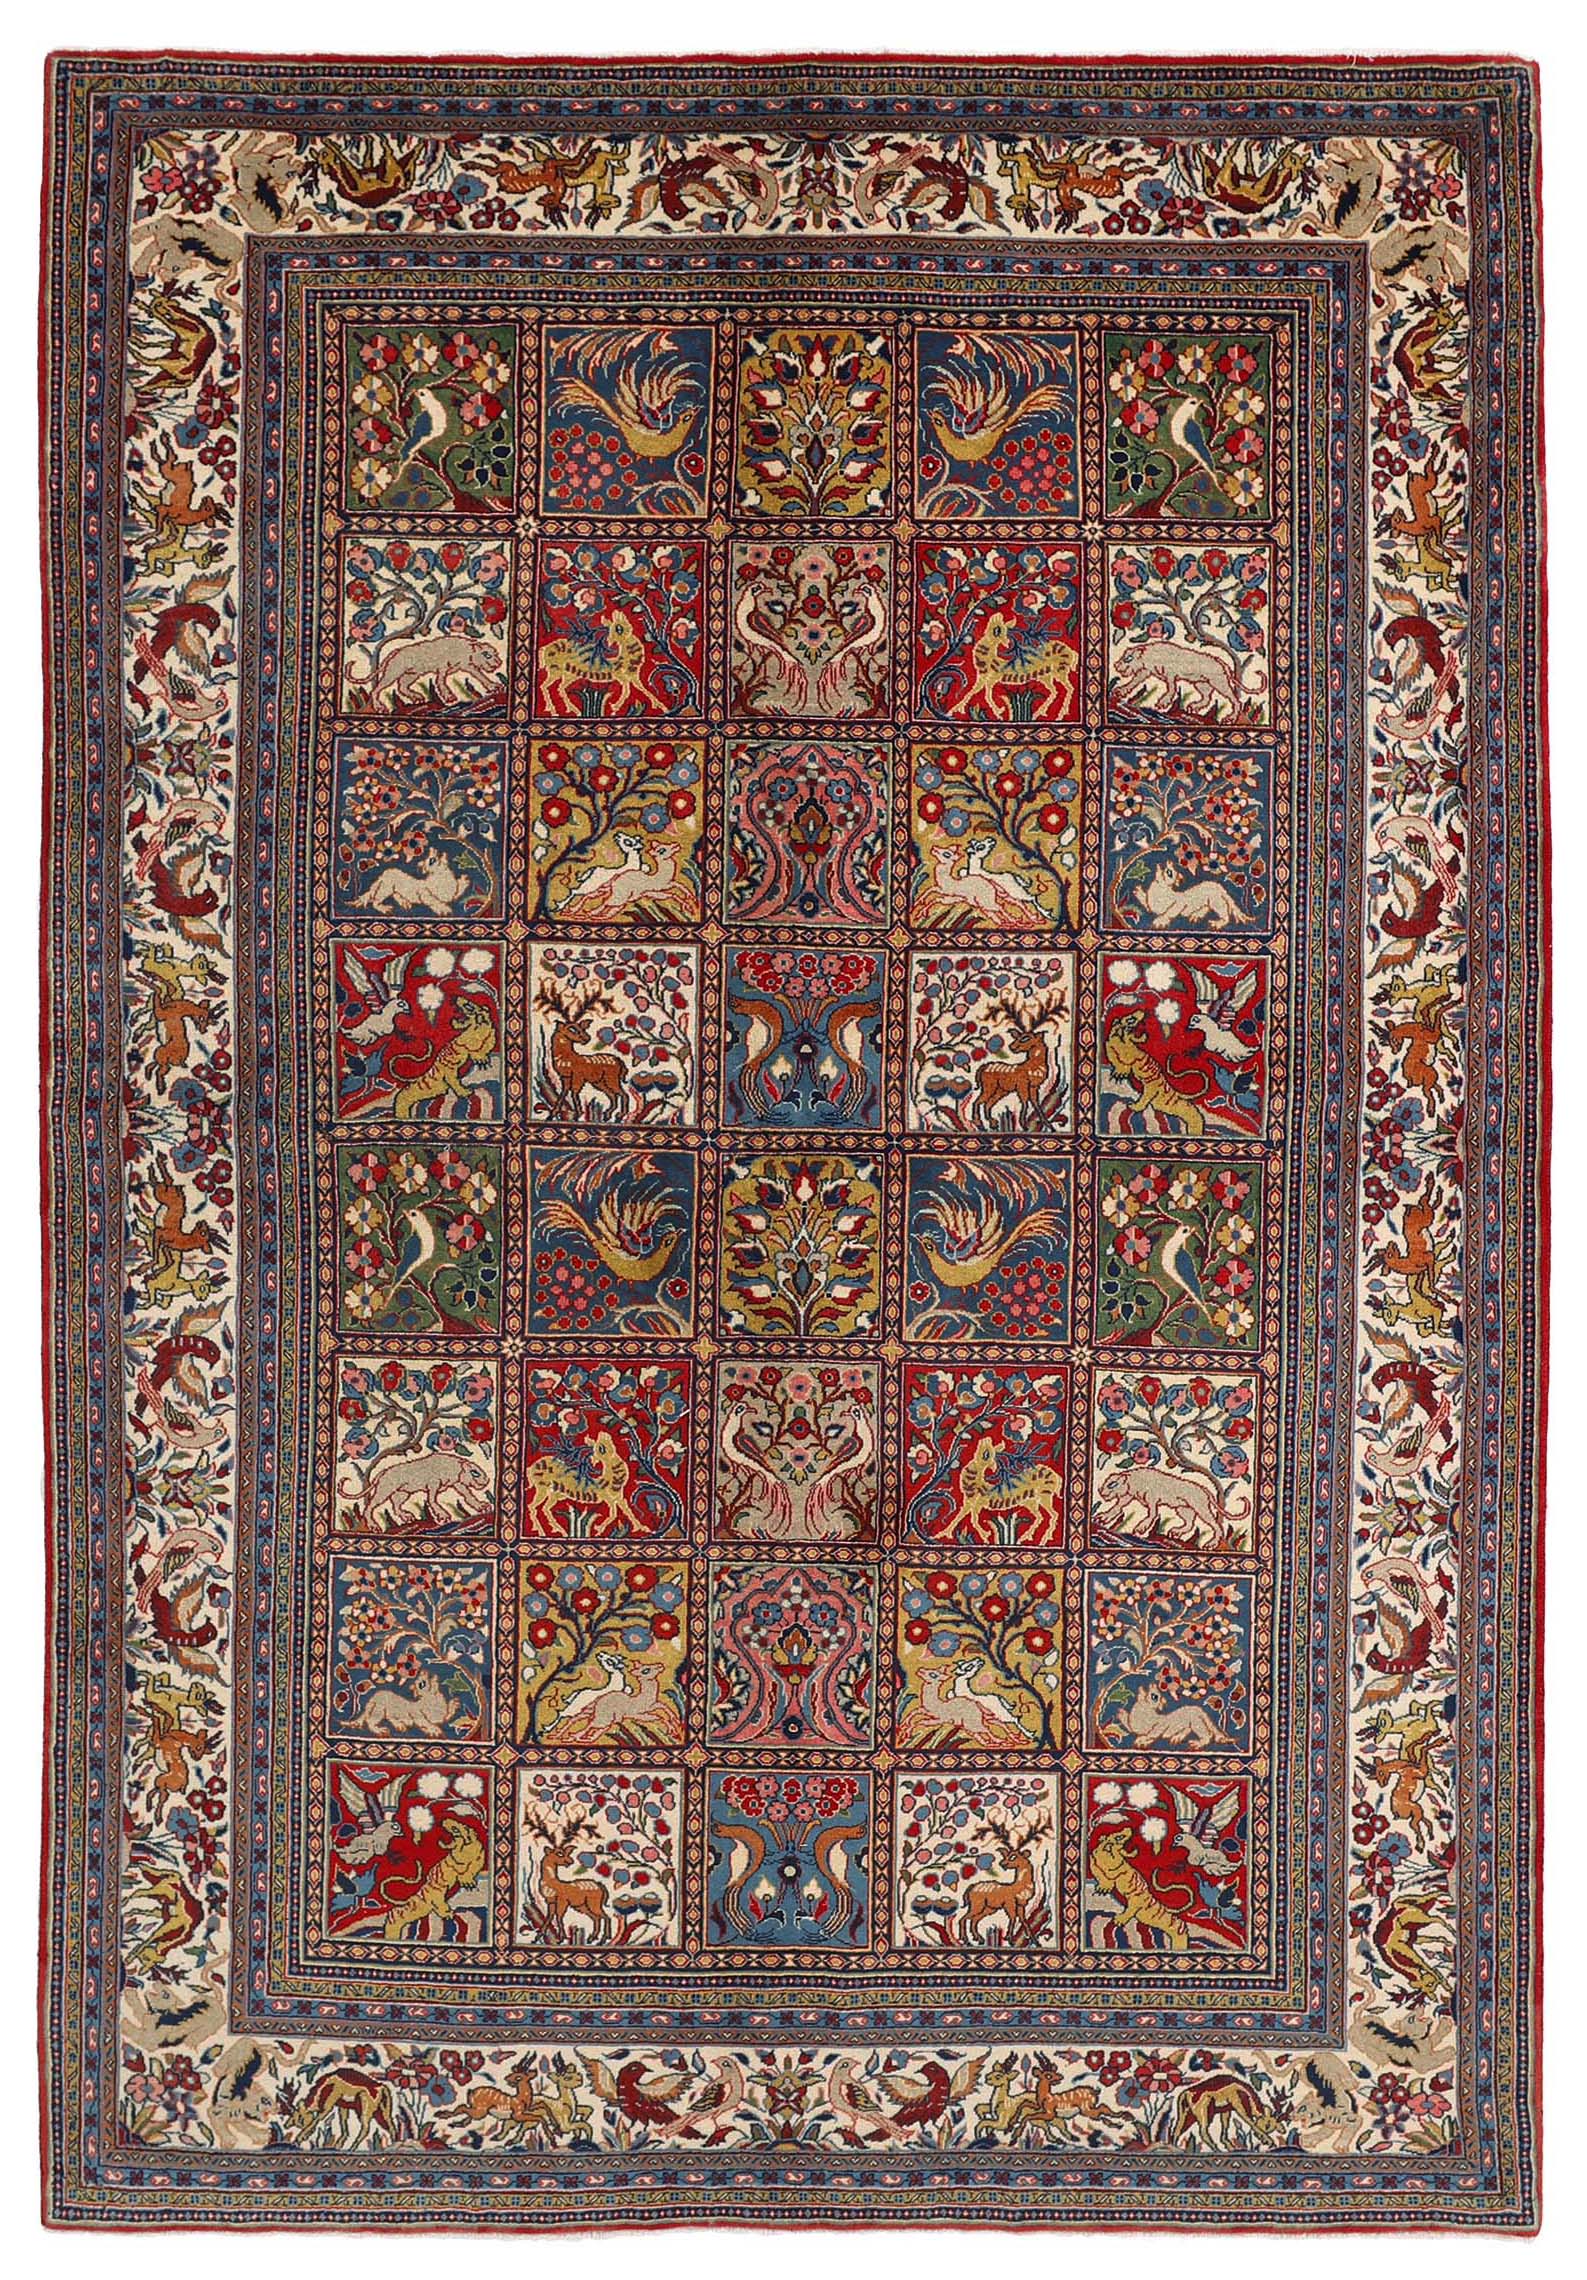 Authentic persian rug with traditional floral design in red, blue and cream